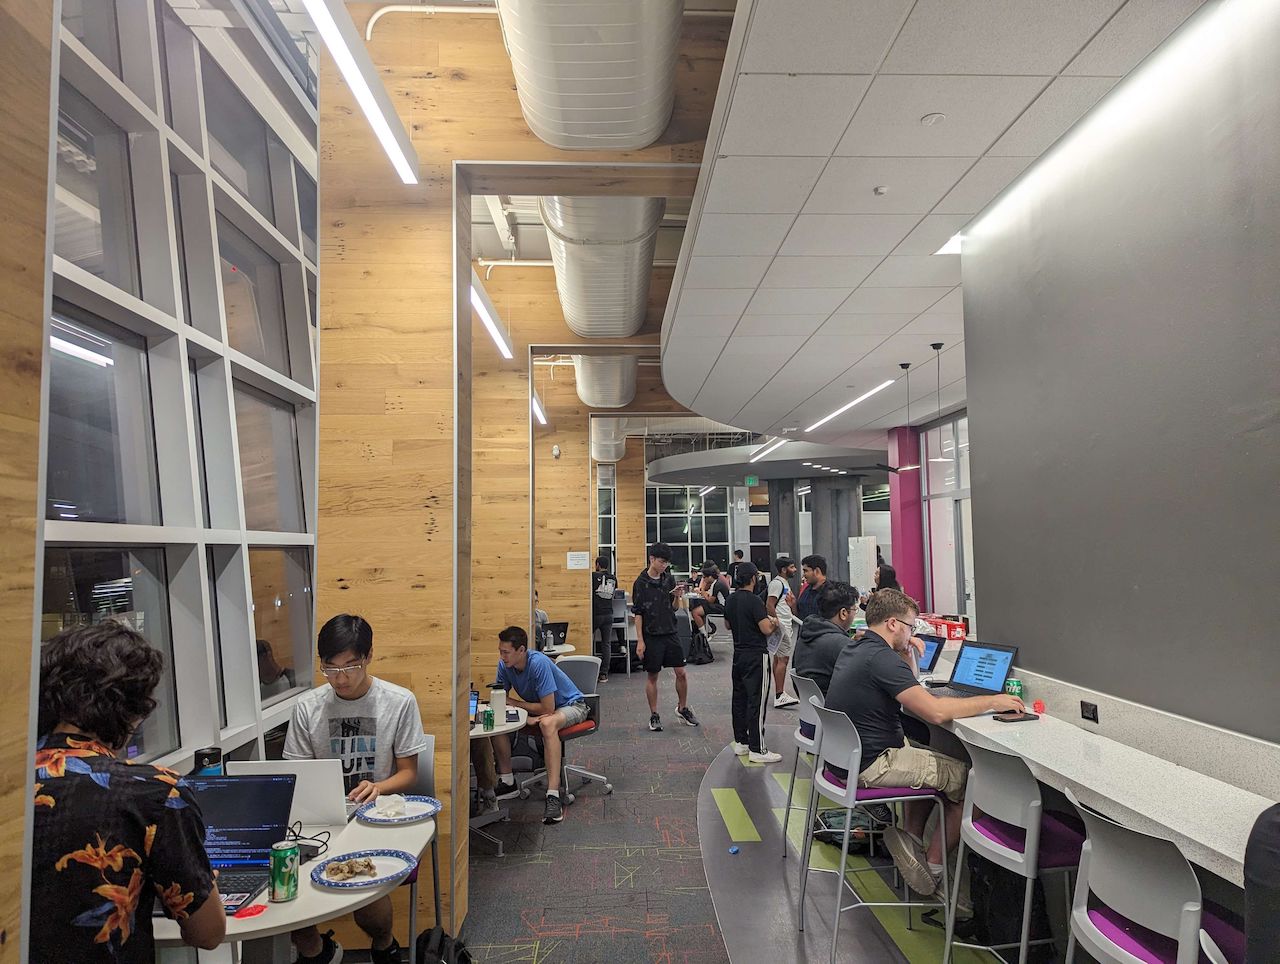 A long shot of a different section of the same makerspace. Every seat is filled with people working.